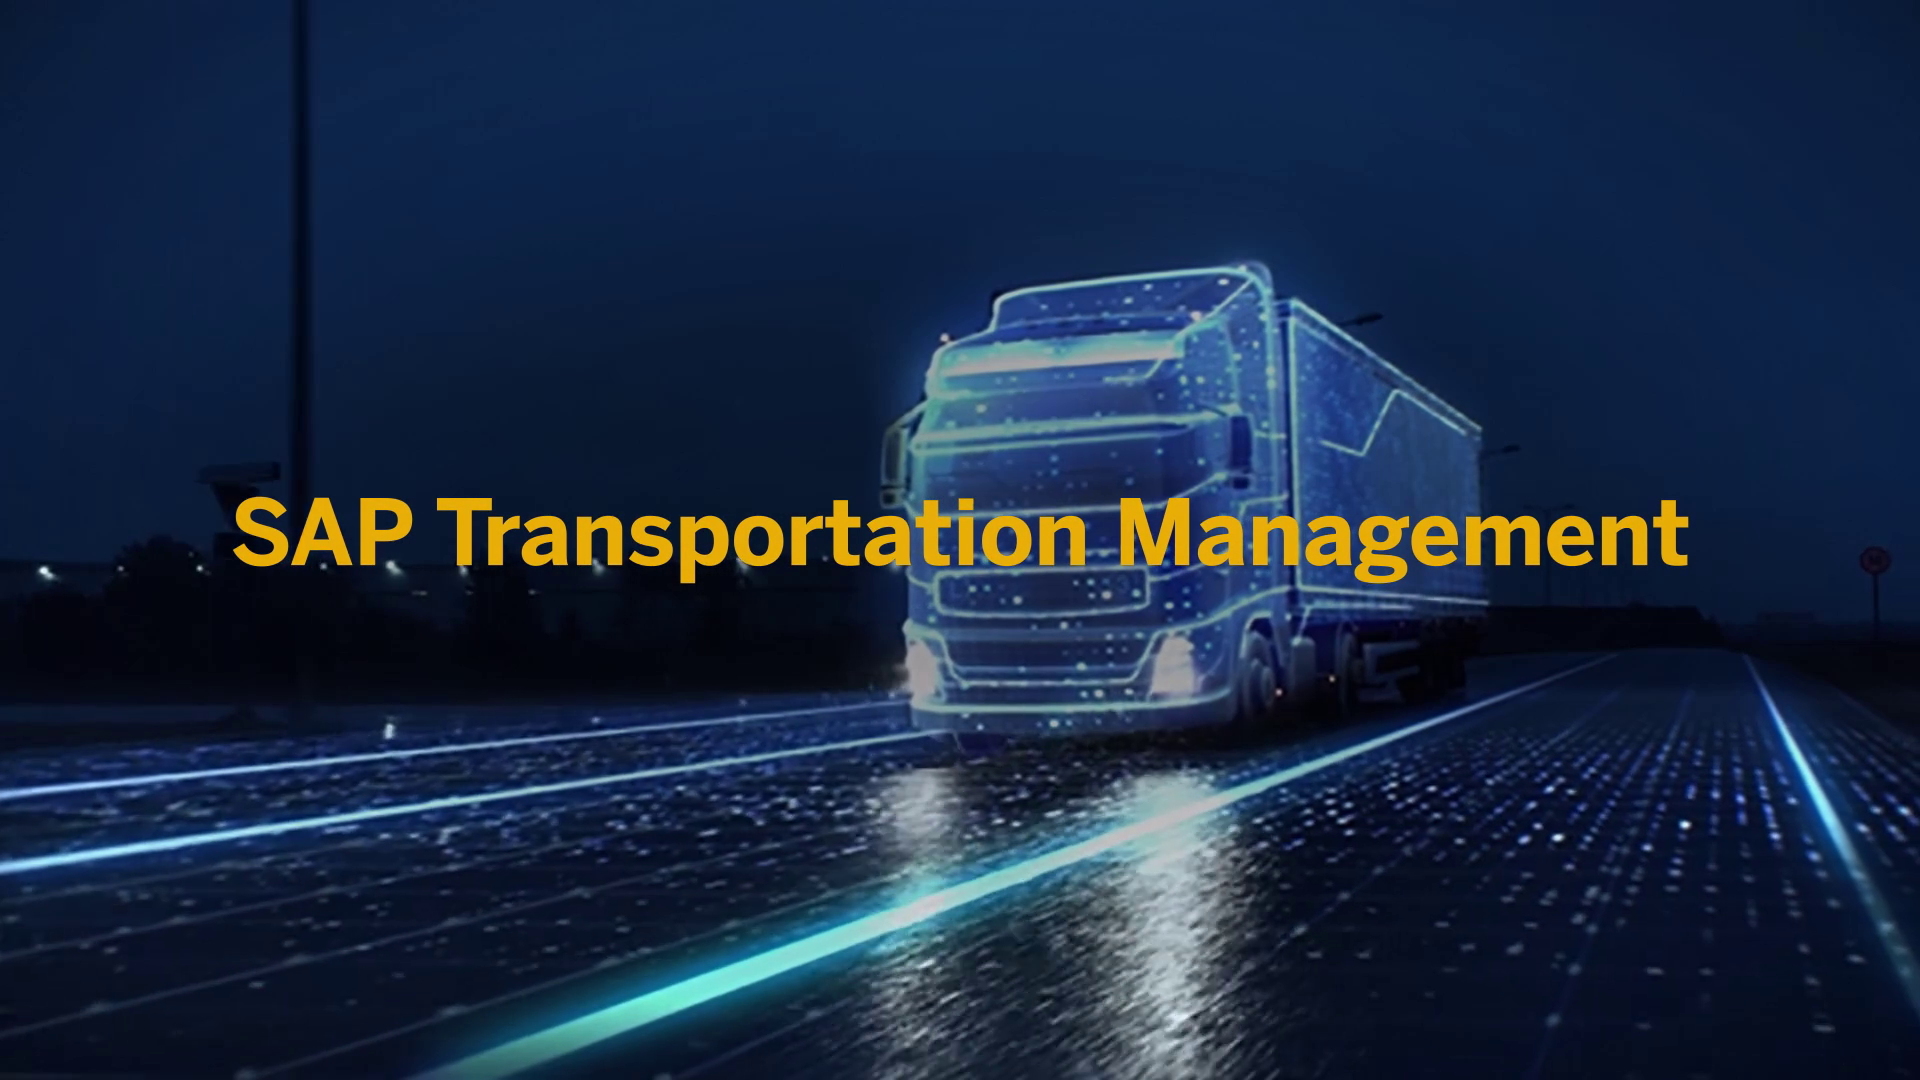 Effectively Managing Transportation Challenges with SAP TM 